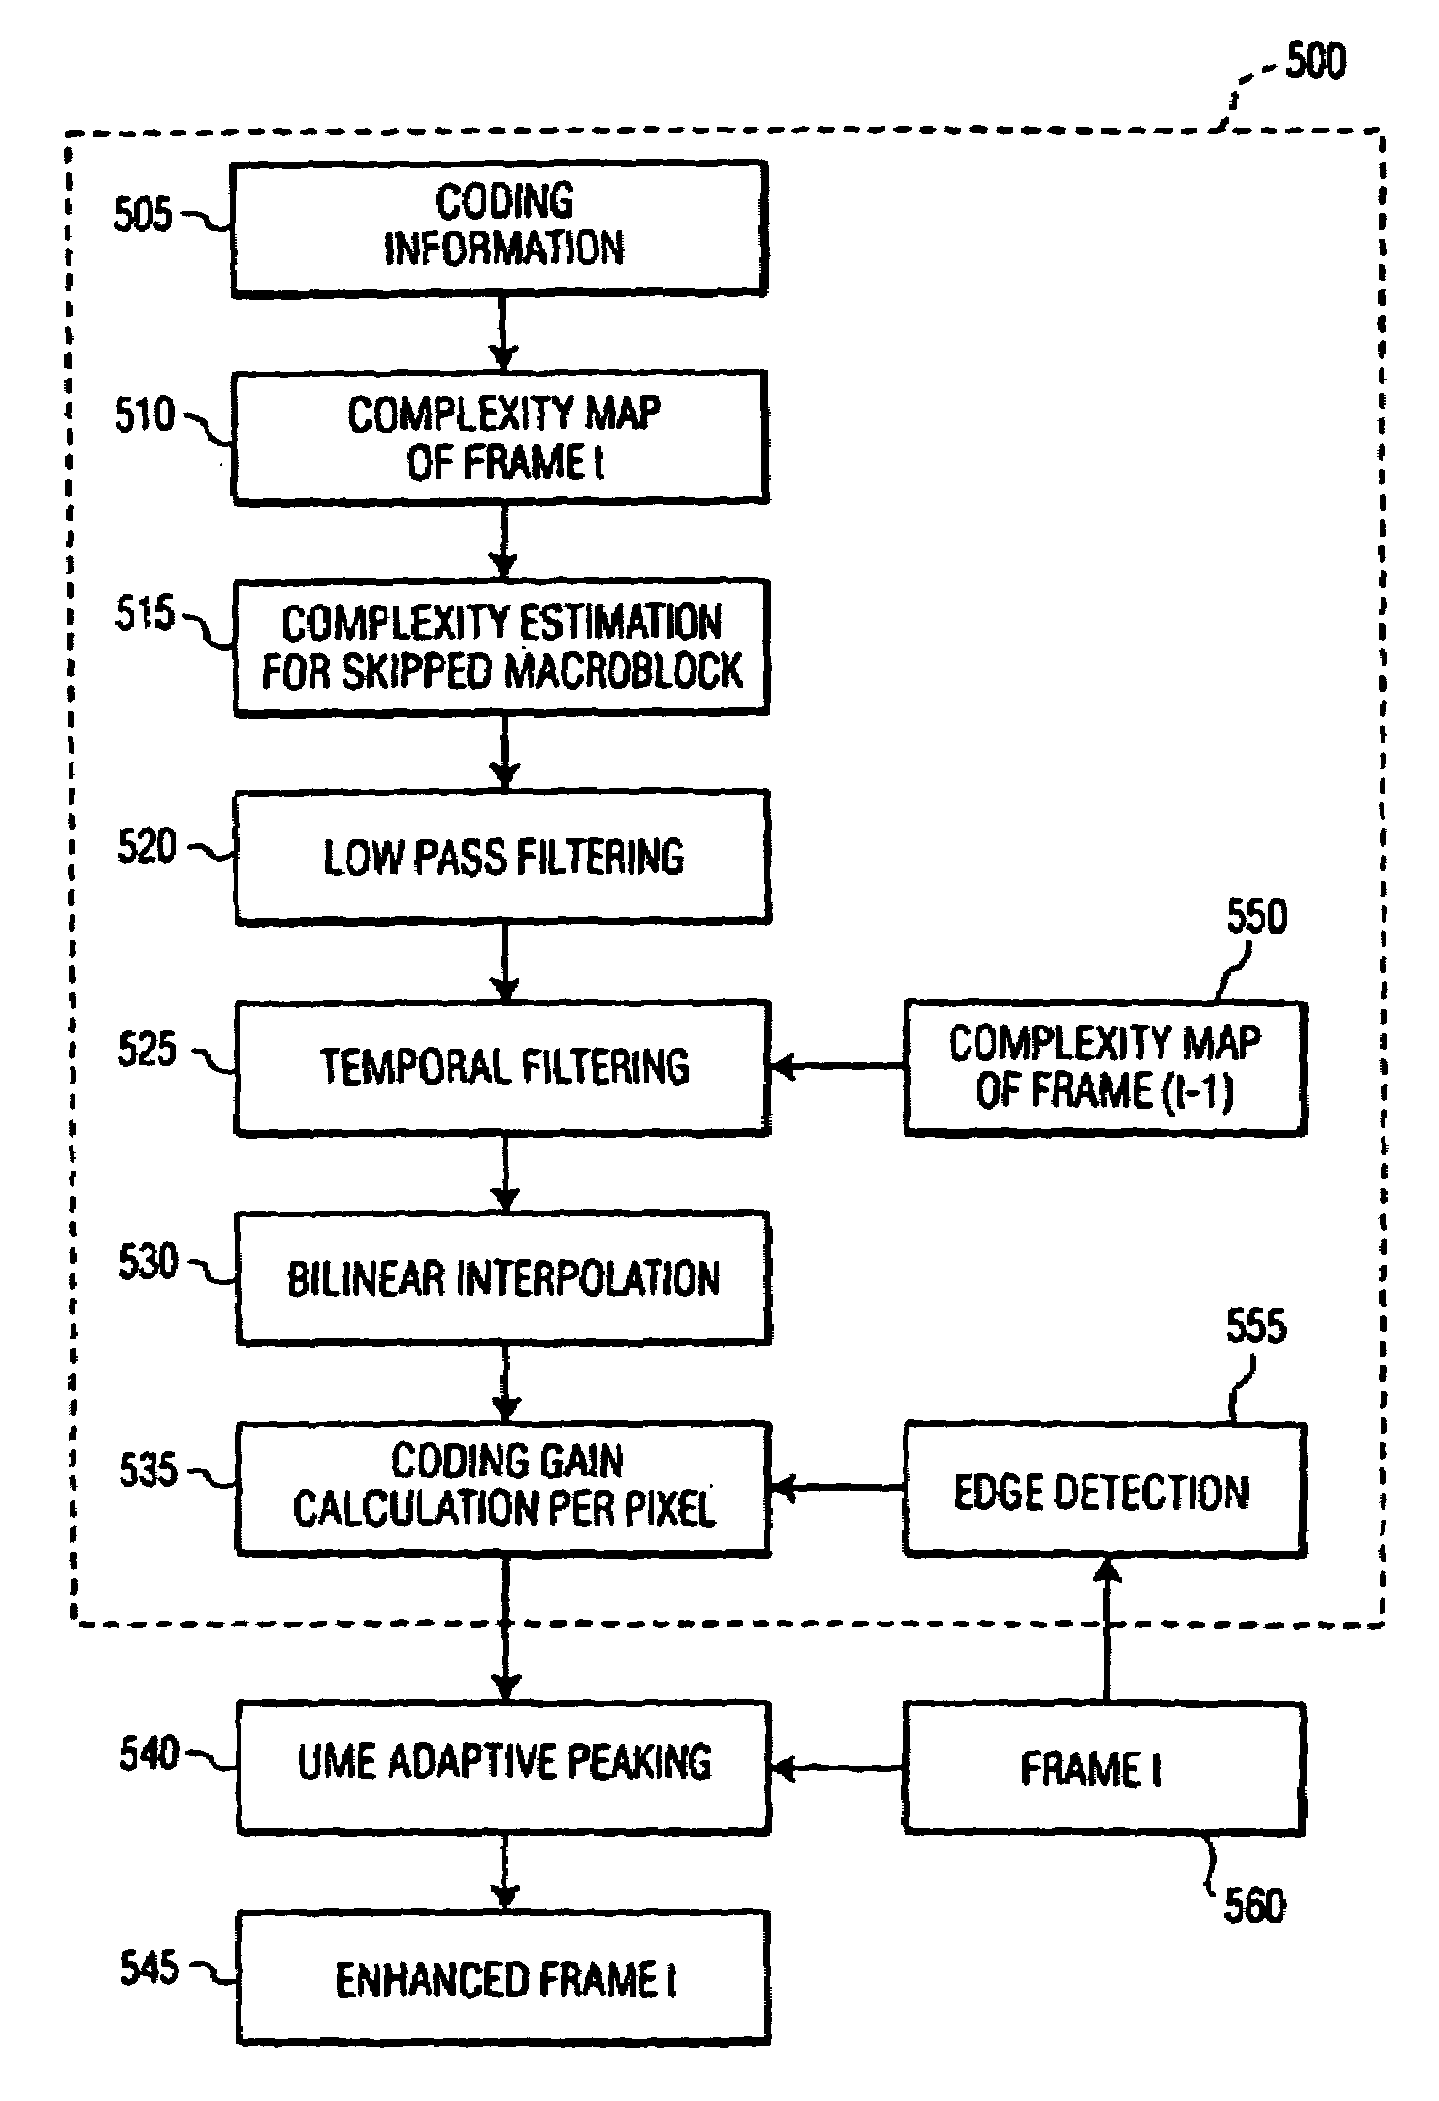 Apparatus and method for providing a usefulness metric based on coding information for video enhancement